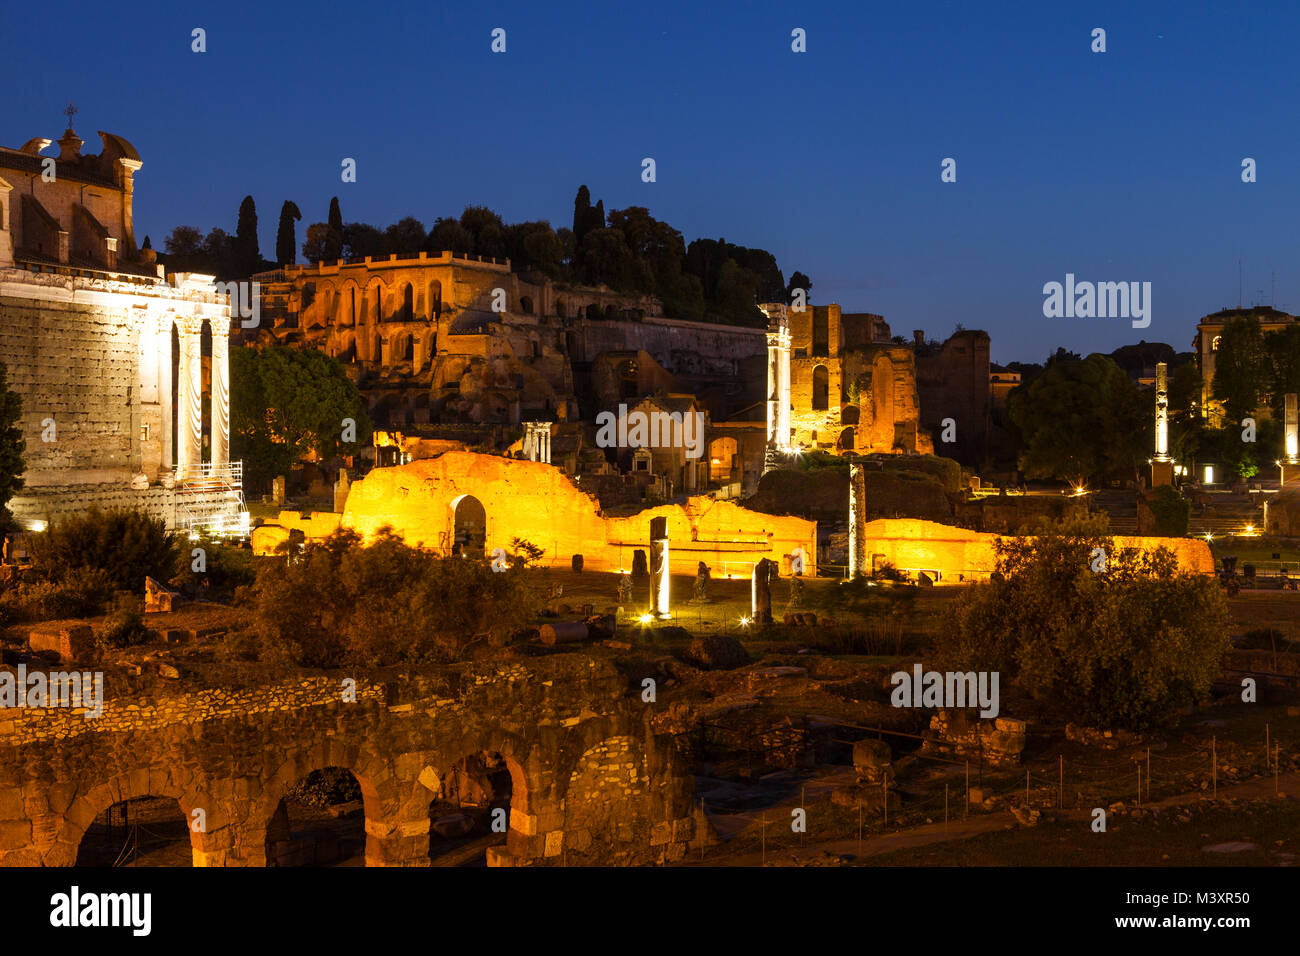 Image of Roman Forum at night time. Rome, Italy Stock Photo